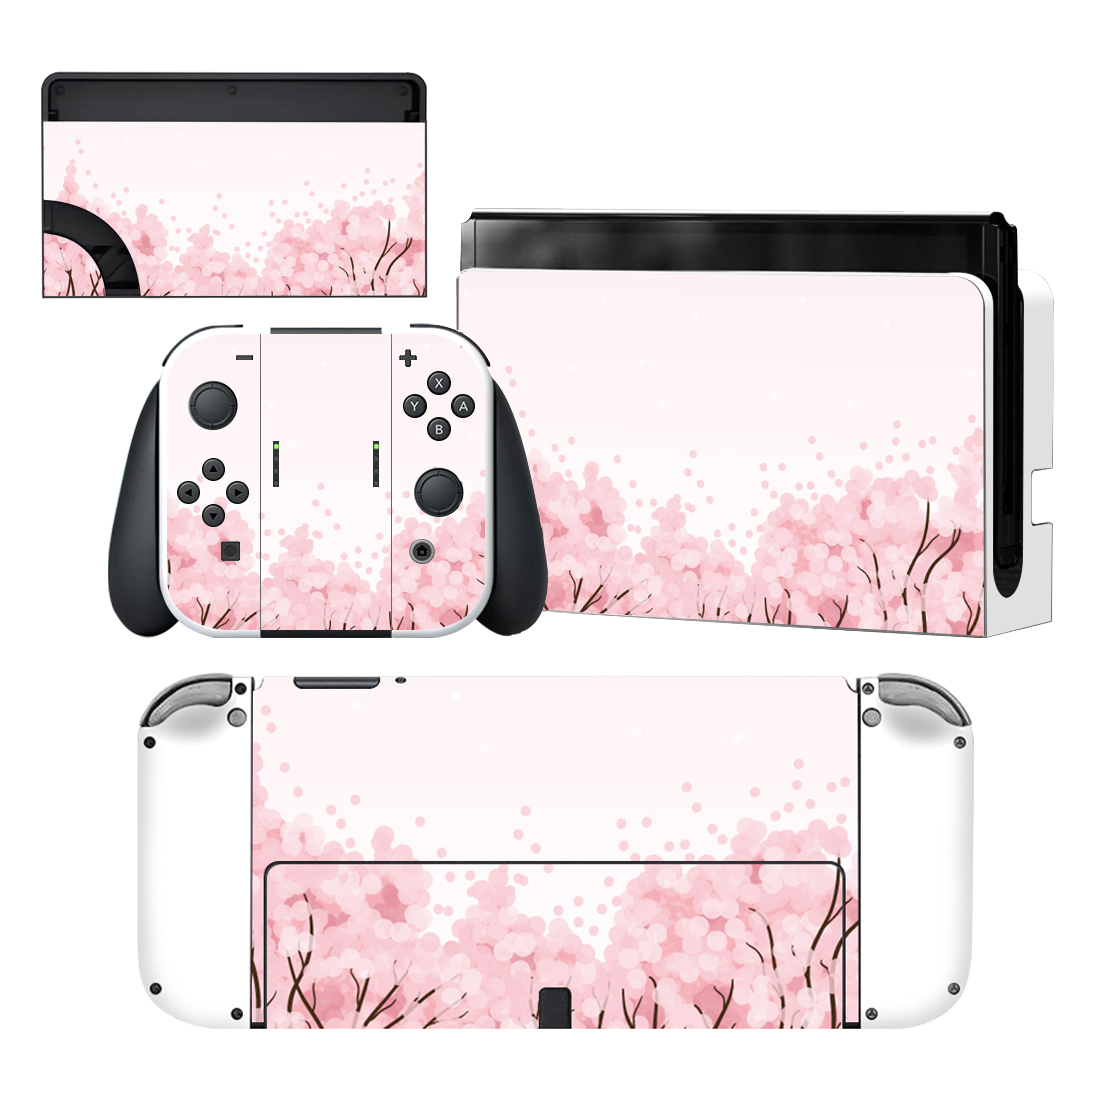 White And Pink Nintendo Switch OLED Skin Sticker Decal